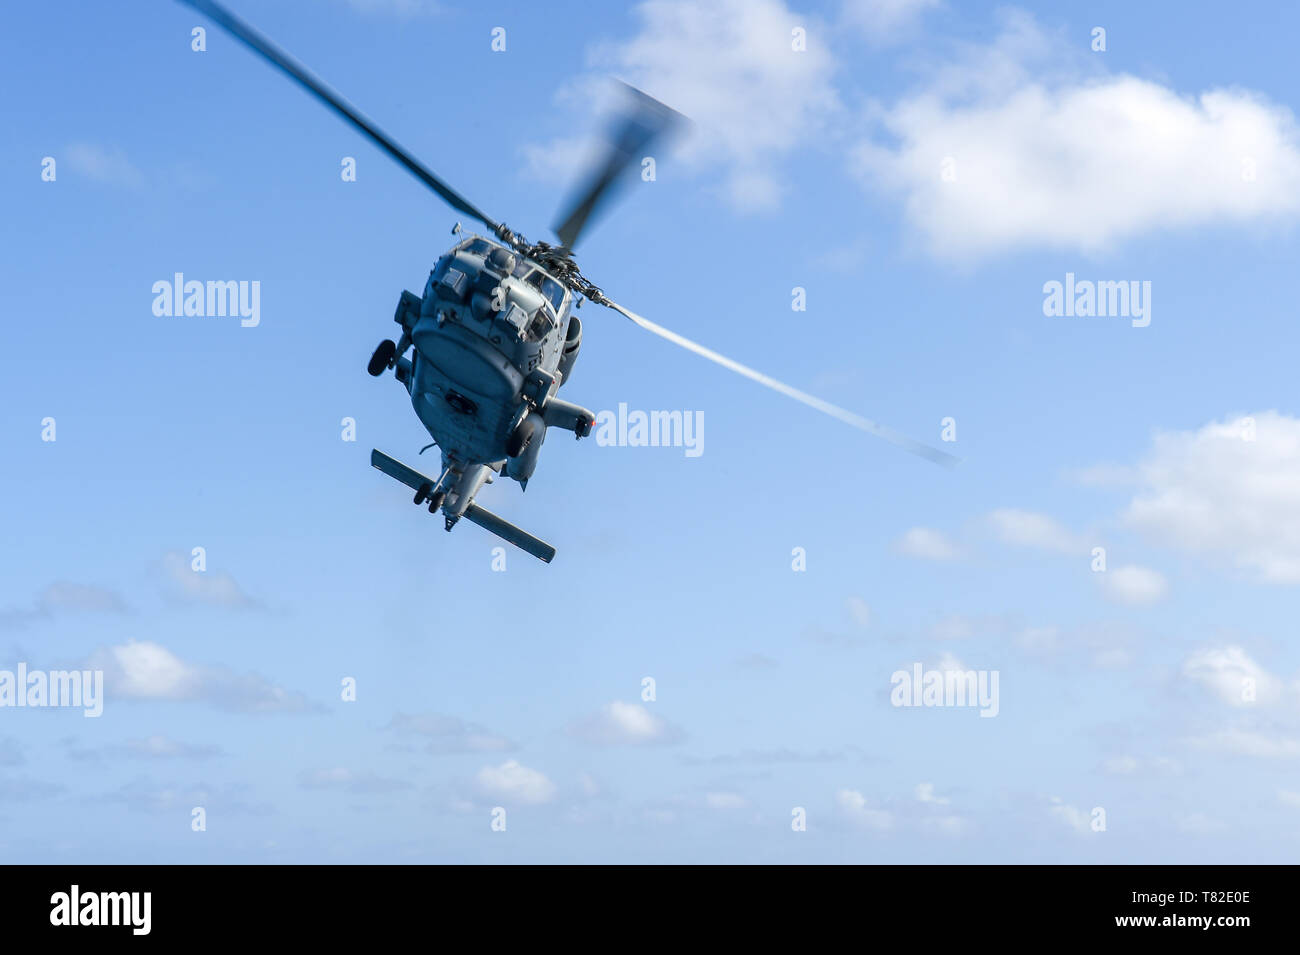 190410-N-UM706-0141 ATLANTIC OCEAN (April 10, 2019) An MH-60R Sea Hawk Helicopter assigned to the “Grandmasters” of Helicopter Maritime Strike Squadron (HSM) 46 conducts a fly-by of the Arleigh Burke-class guided-missile destroyer USS Nitze (DDG 94). Nitze is underway as part of Abraham Lincoln Carrier Strike Group (ABECSG) deployment in support of maritime security cooperation efforts in the U.S. 5th, 6th and 7th Fleet areas of responsibility. With Abraham Lincoln as the flagship, deployed strike group assets include staffs, ships and aircraft of Carrier Strike Group 12 (CSG 12), Destroyer Sq Stock Photo